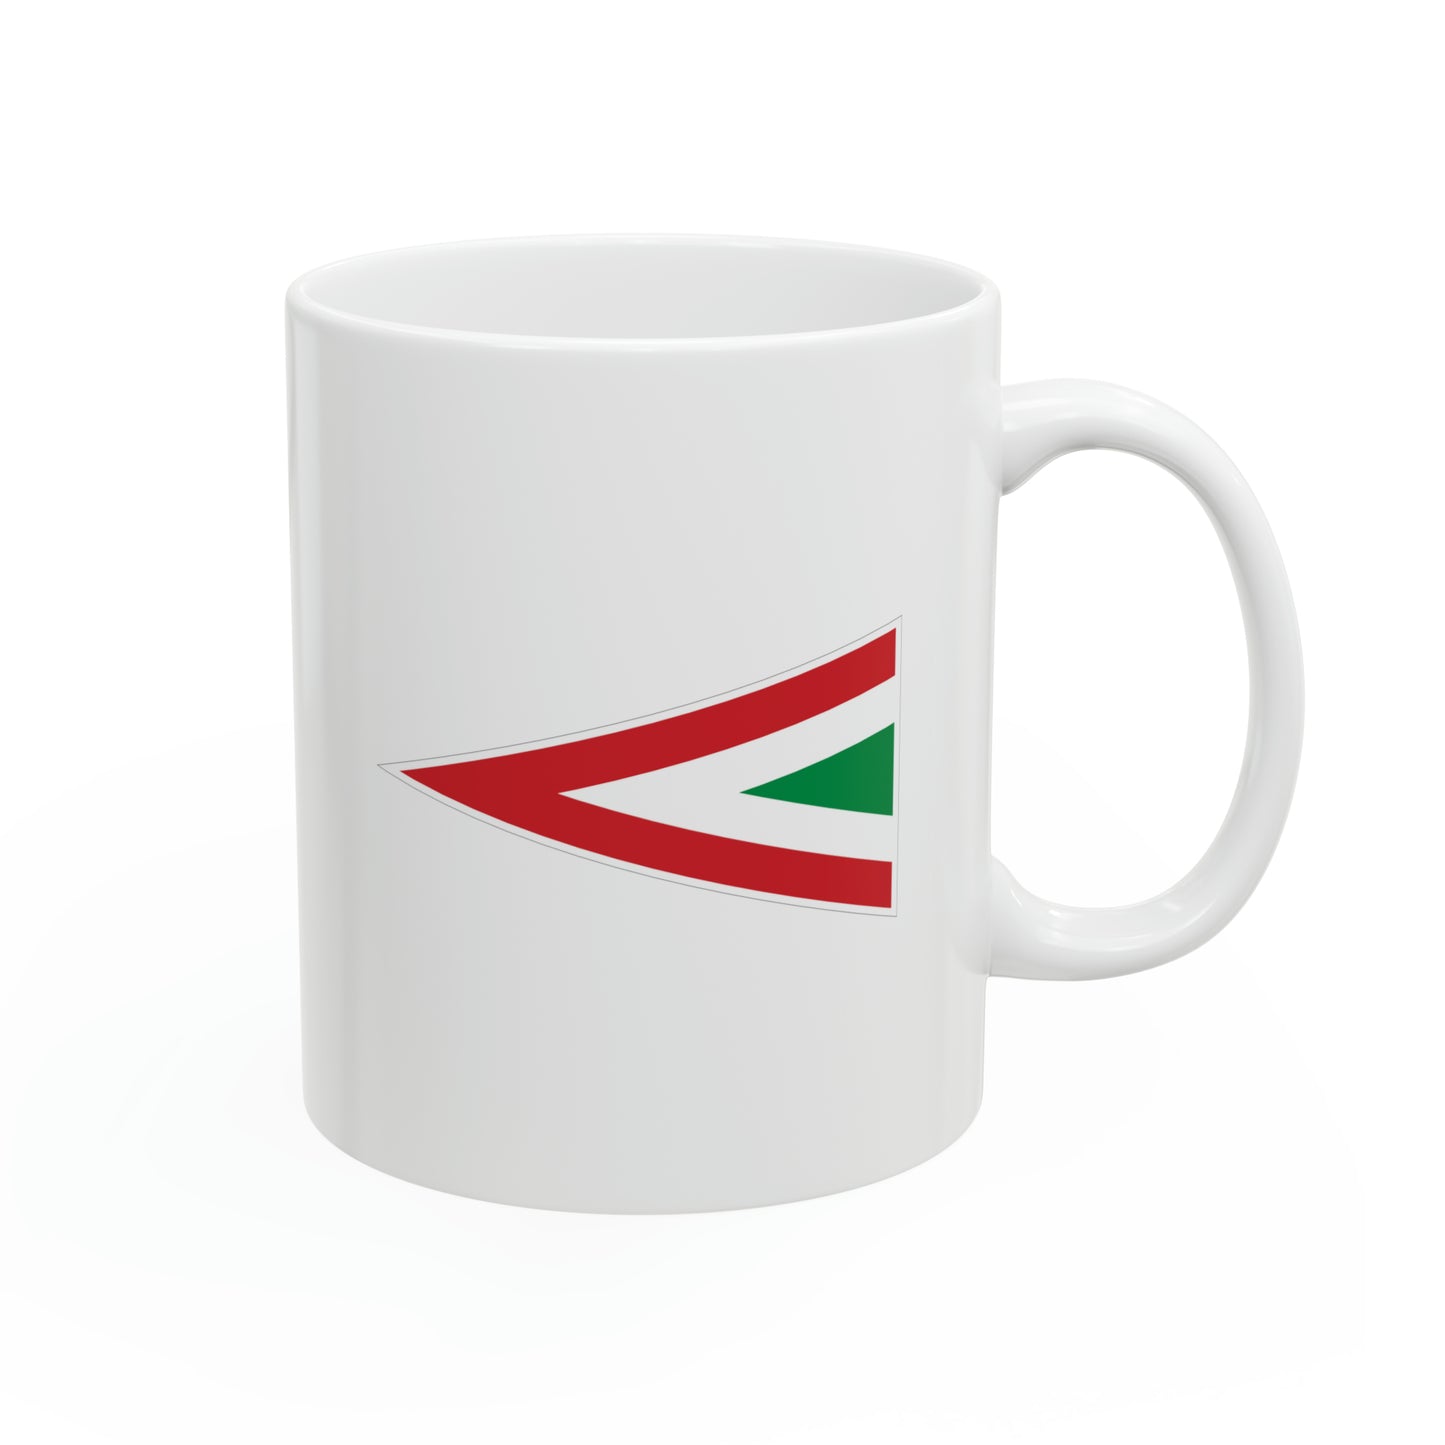 Hungarian Air Force Roundel Coffee Mug - Double Sided White Ceramic 11oz - By TheGlassyLass.com